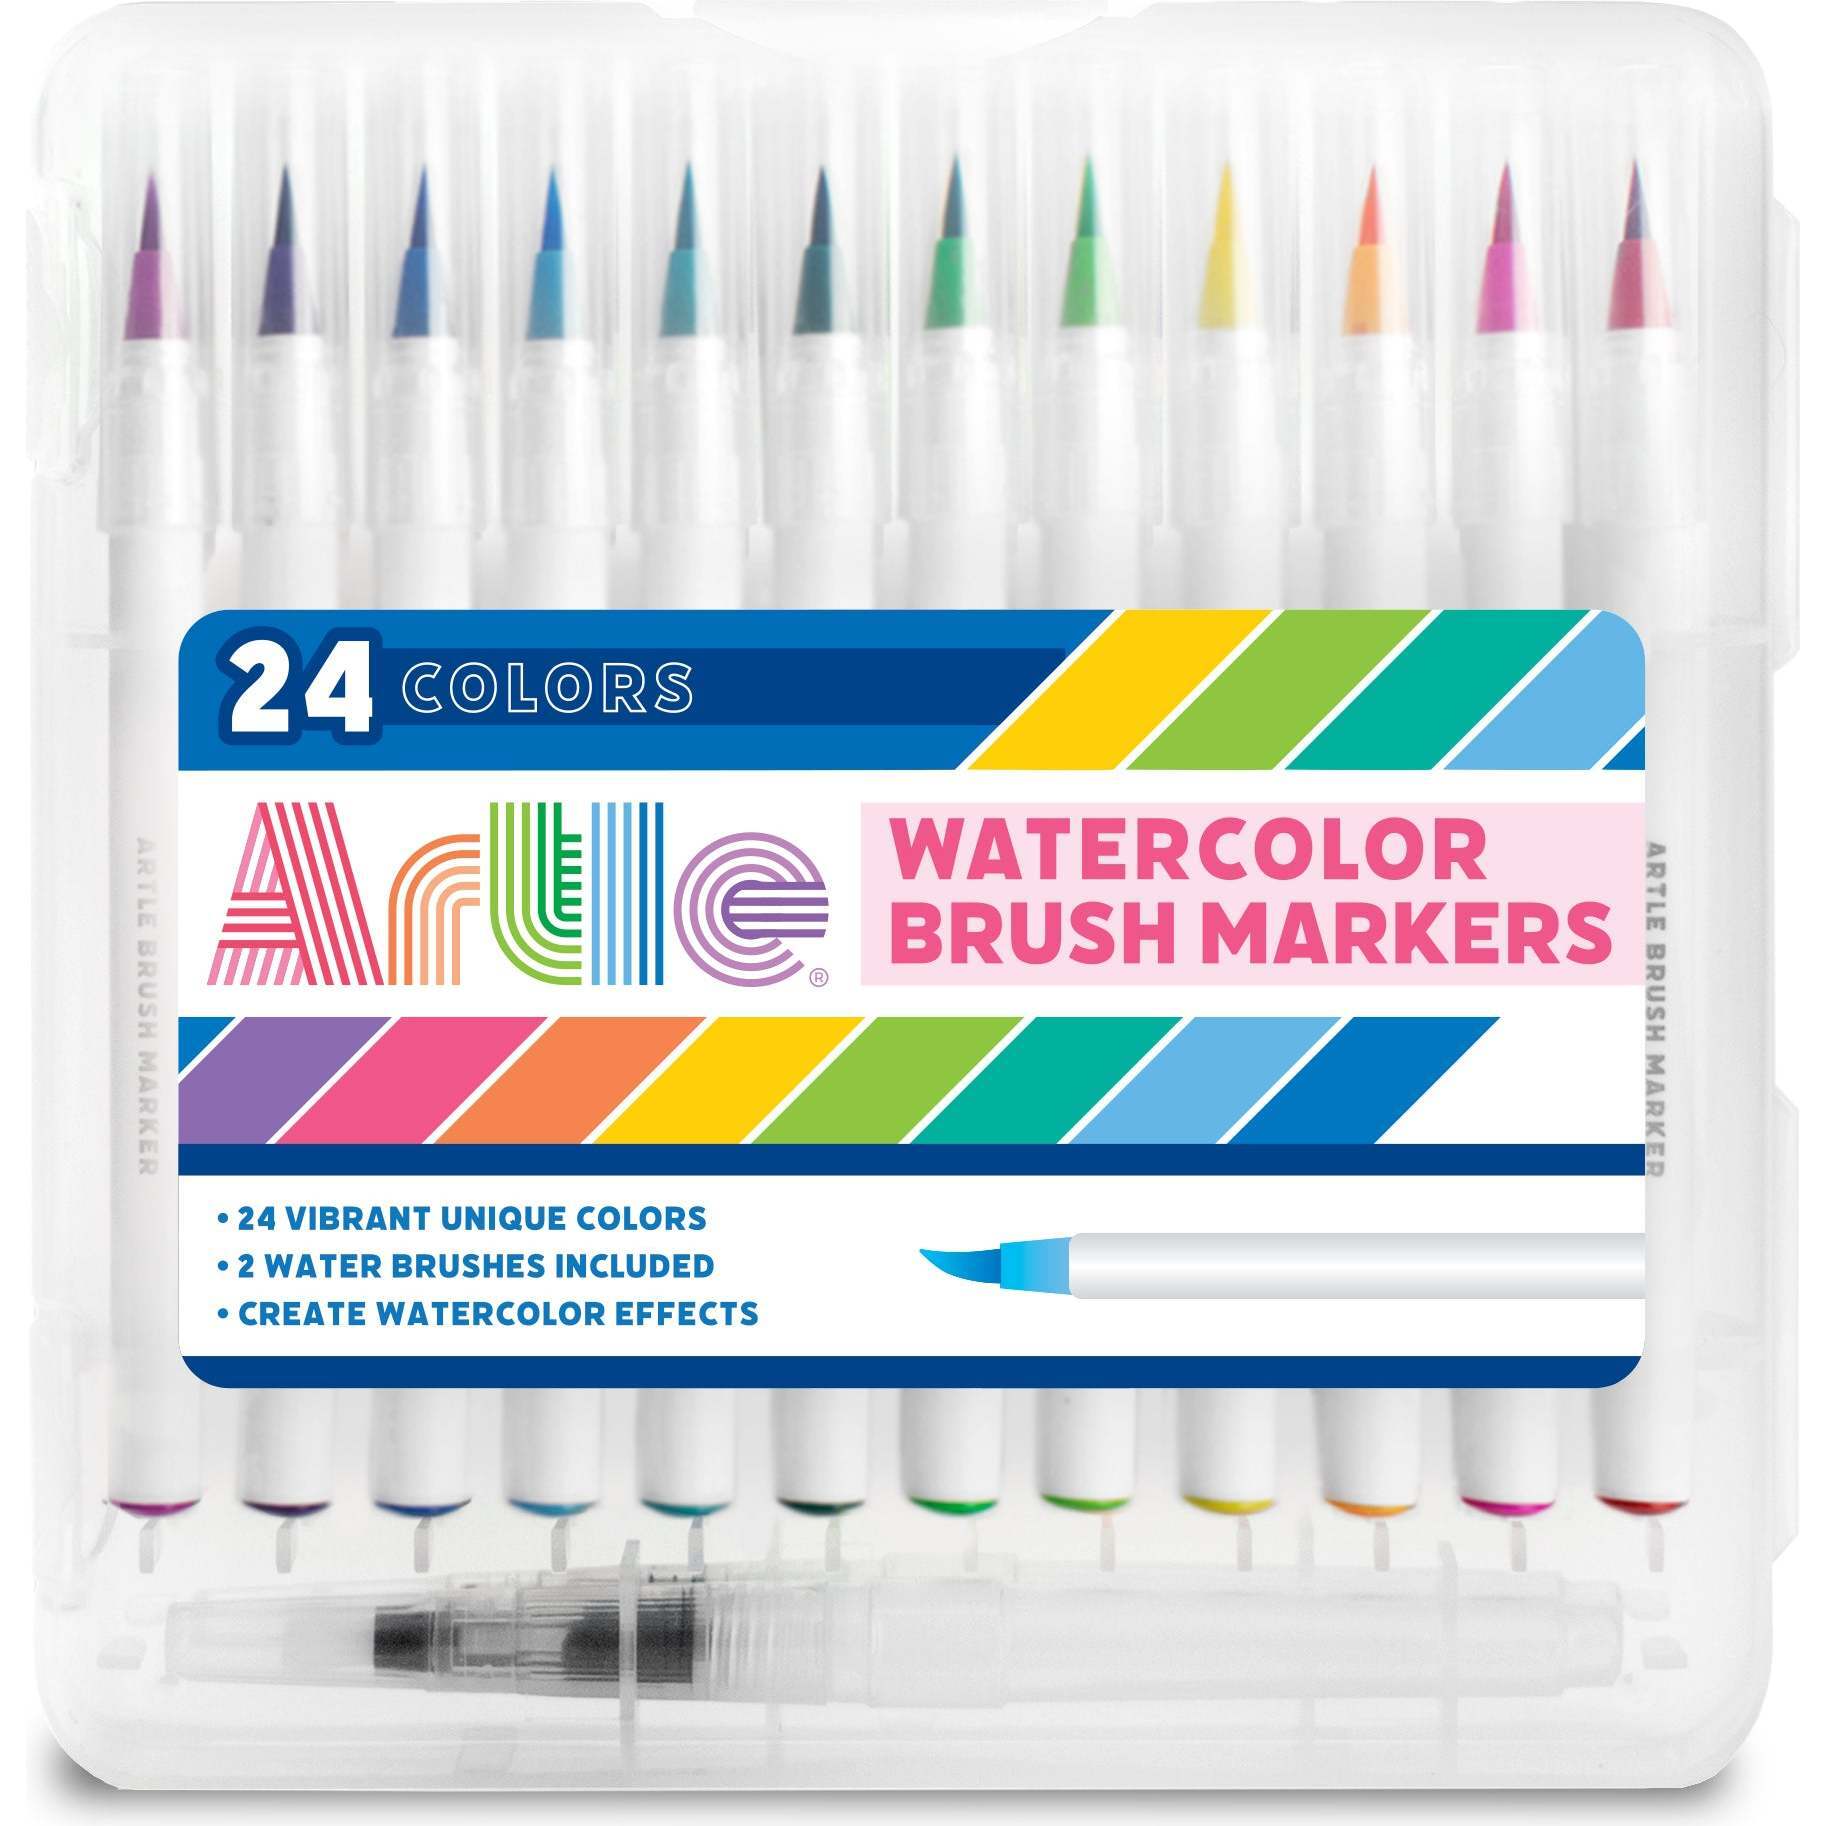 Artle: Watercolor Brush Markers - 26 PC Set - OOLY Arts & Crafts